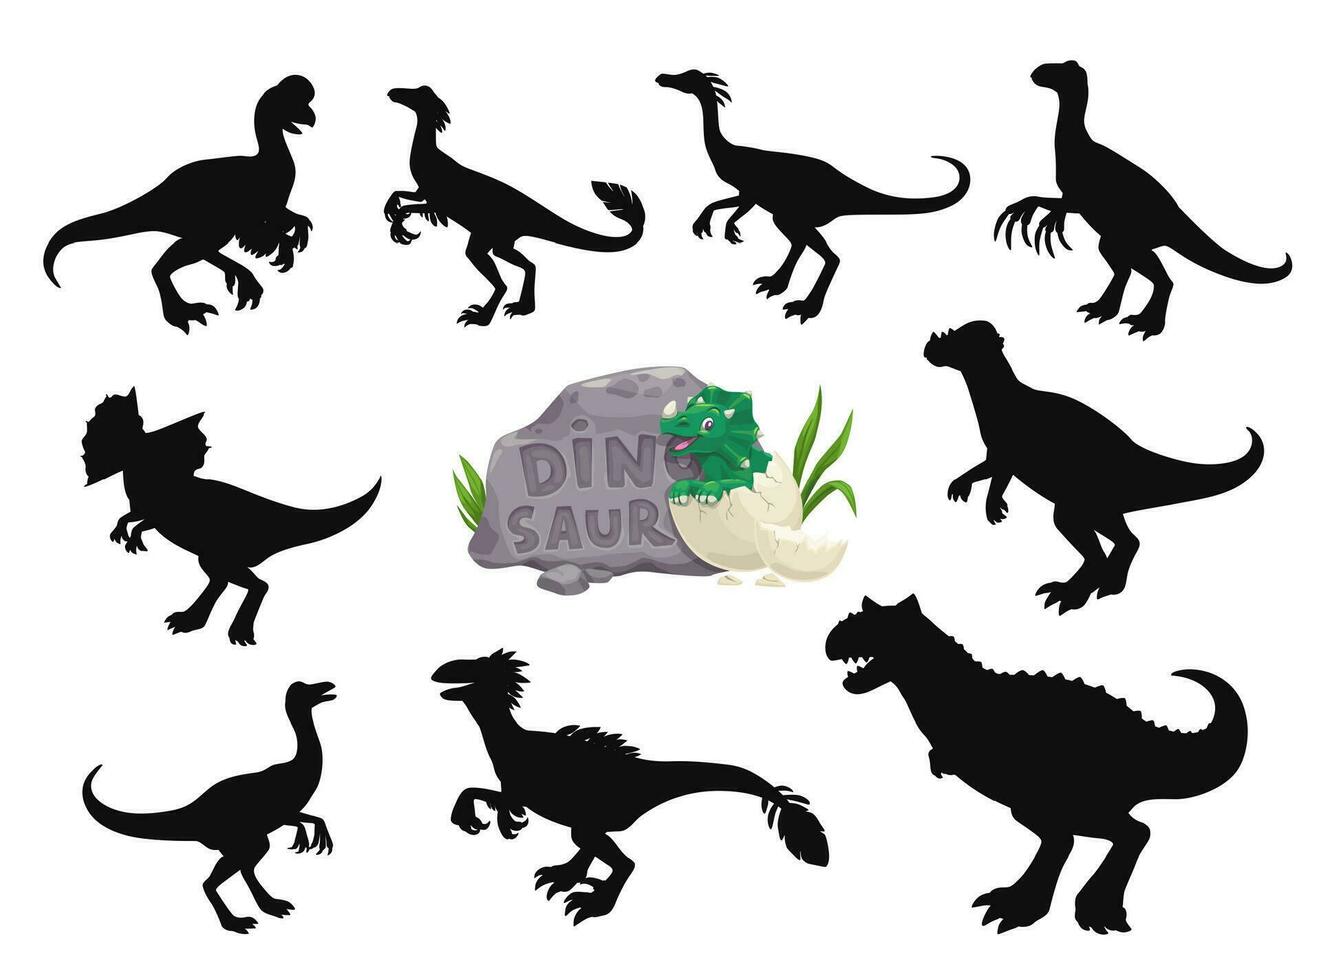 Cartoon dinosaurs funny characters silhouettes vector